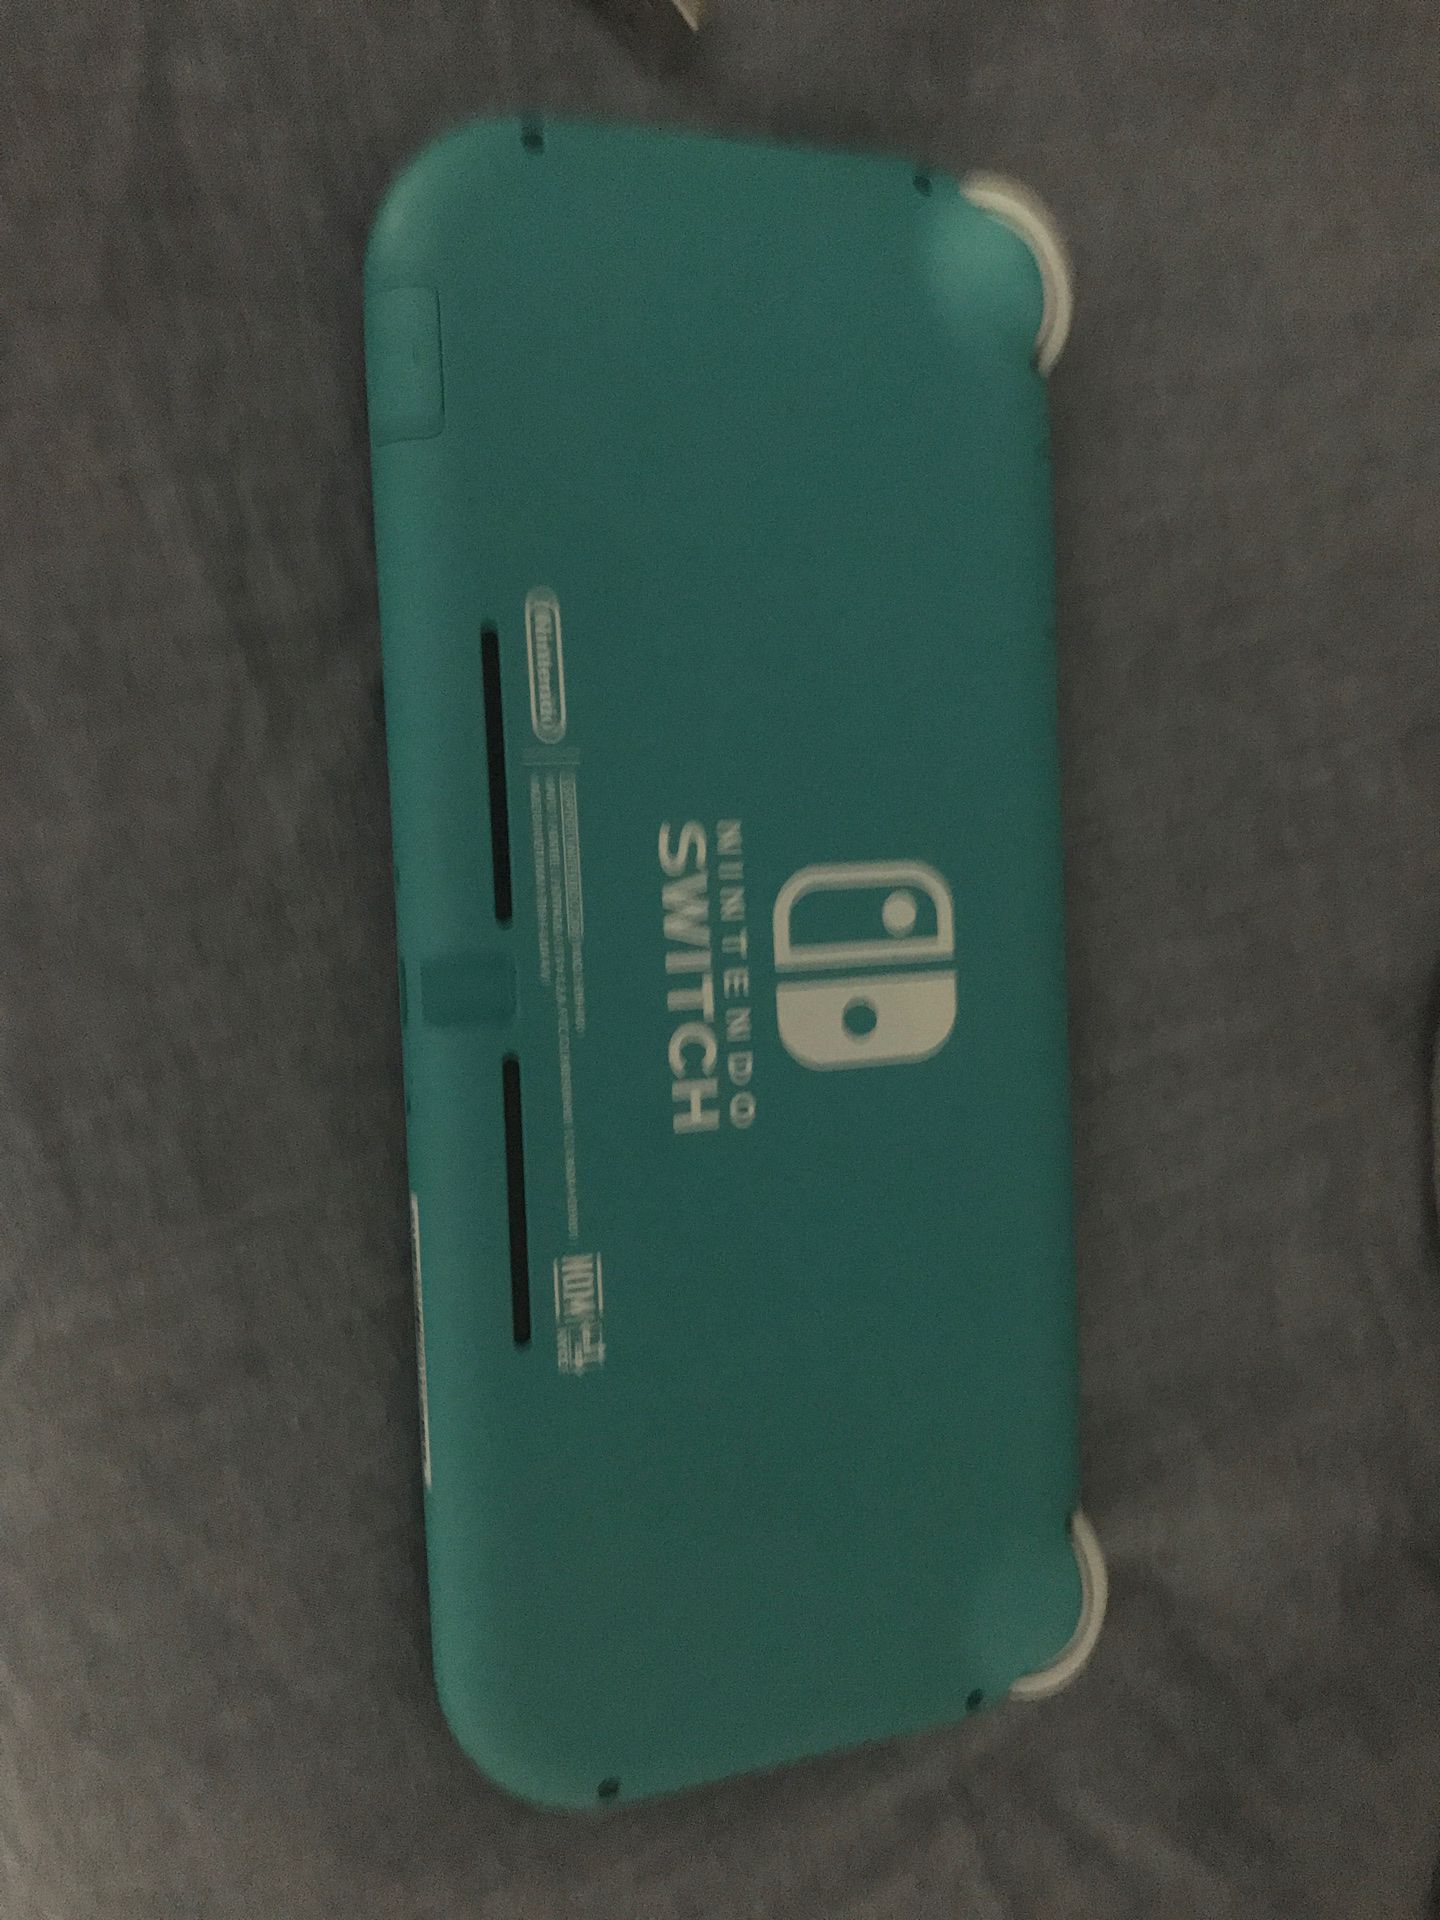 Nintendo switch Lyte great for kids